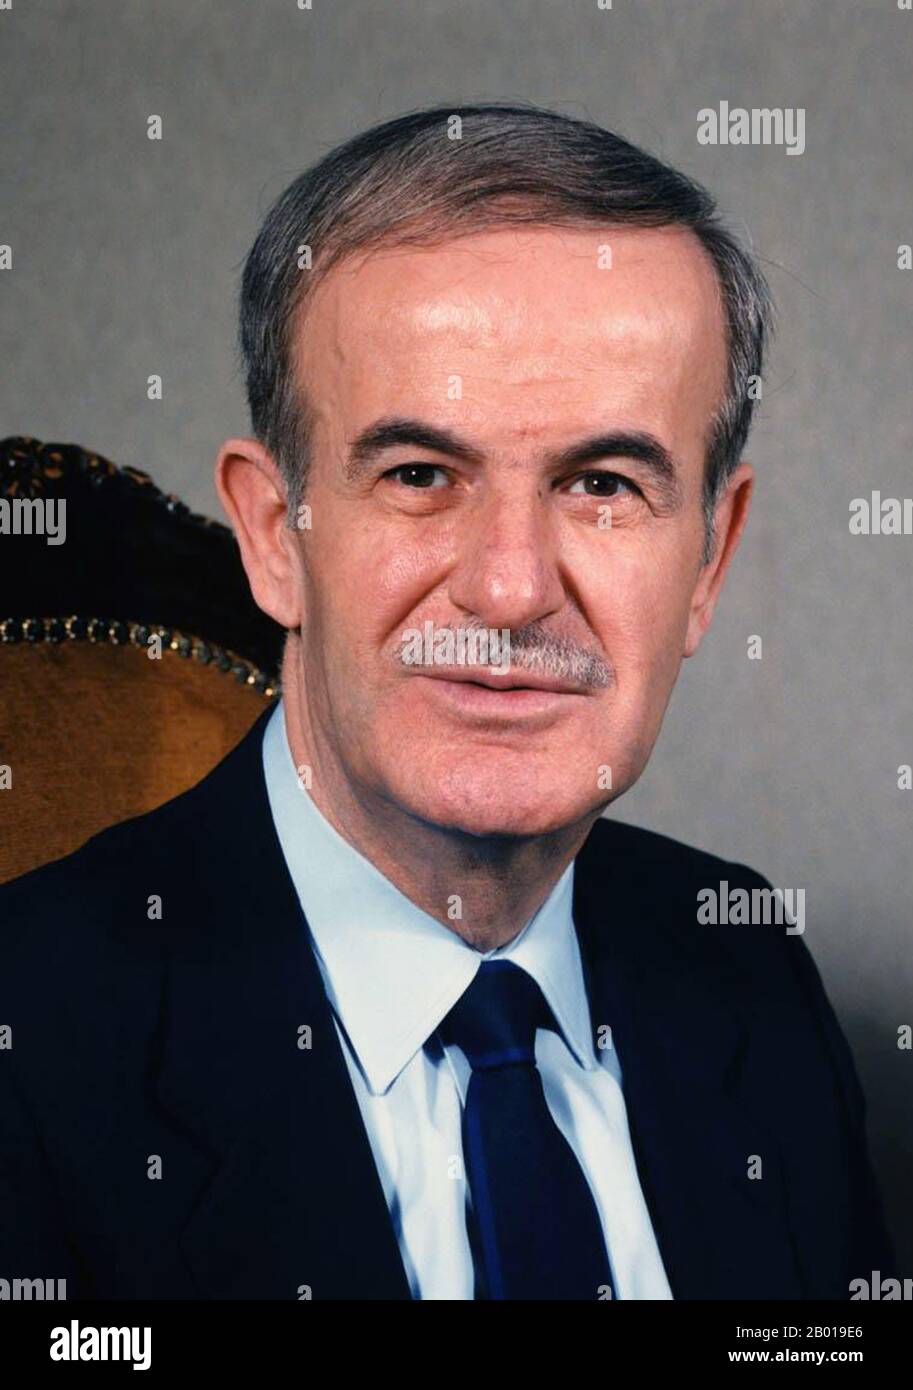 Syria: Hafez al-Assad (6 October 1930 - 10 June 2000), President of Syria (r. 1971-2000). Official portrait, c. 1987.  Hafez al-Assad was the president of Syria for three decades. Assad's rule was praised for consolidating the power of the central government after decades of coups and counter-coups. He also drew criticism for repressing his own people, in particular for ordering the Hama massacre of 1982, which has been described as the single deadliest act by any Arab government against its own people in the modern Middle East. He was succeeded by his son, Bashar al-Assad, in 2000. Stock Photo